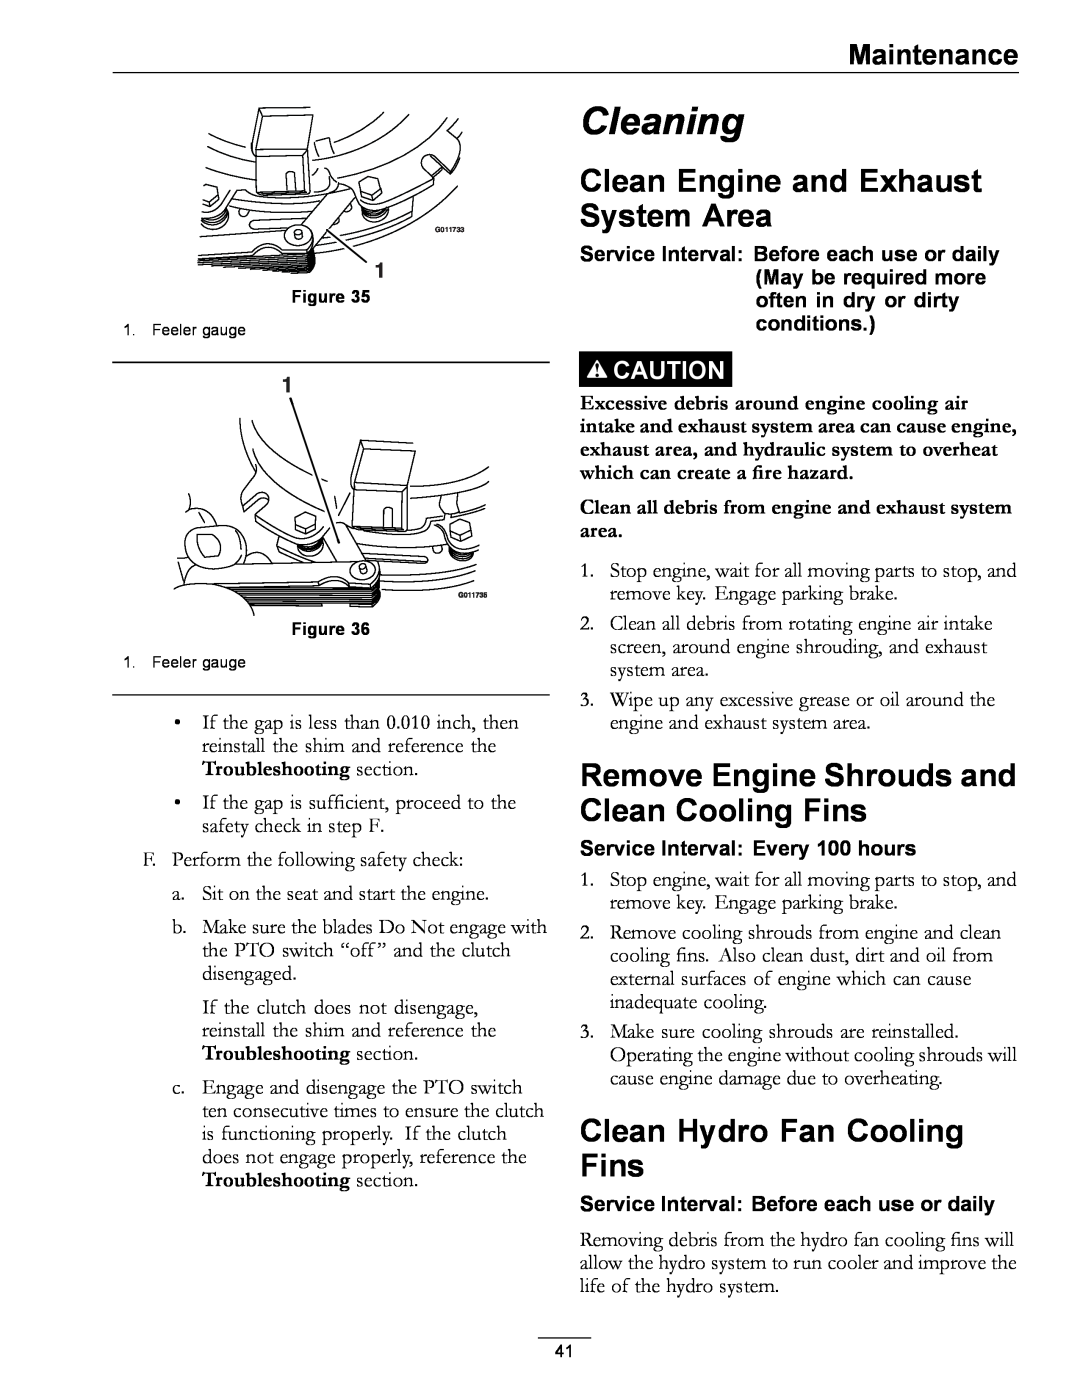 Exmark 920 manual Cleaning, Clean Engine and Exhaust System Area, Remove Engine Shrouds and Clean Cooling Fins, Maintenance 